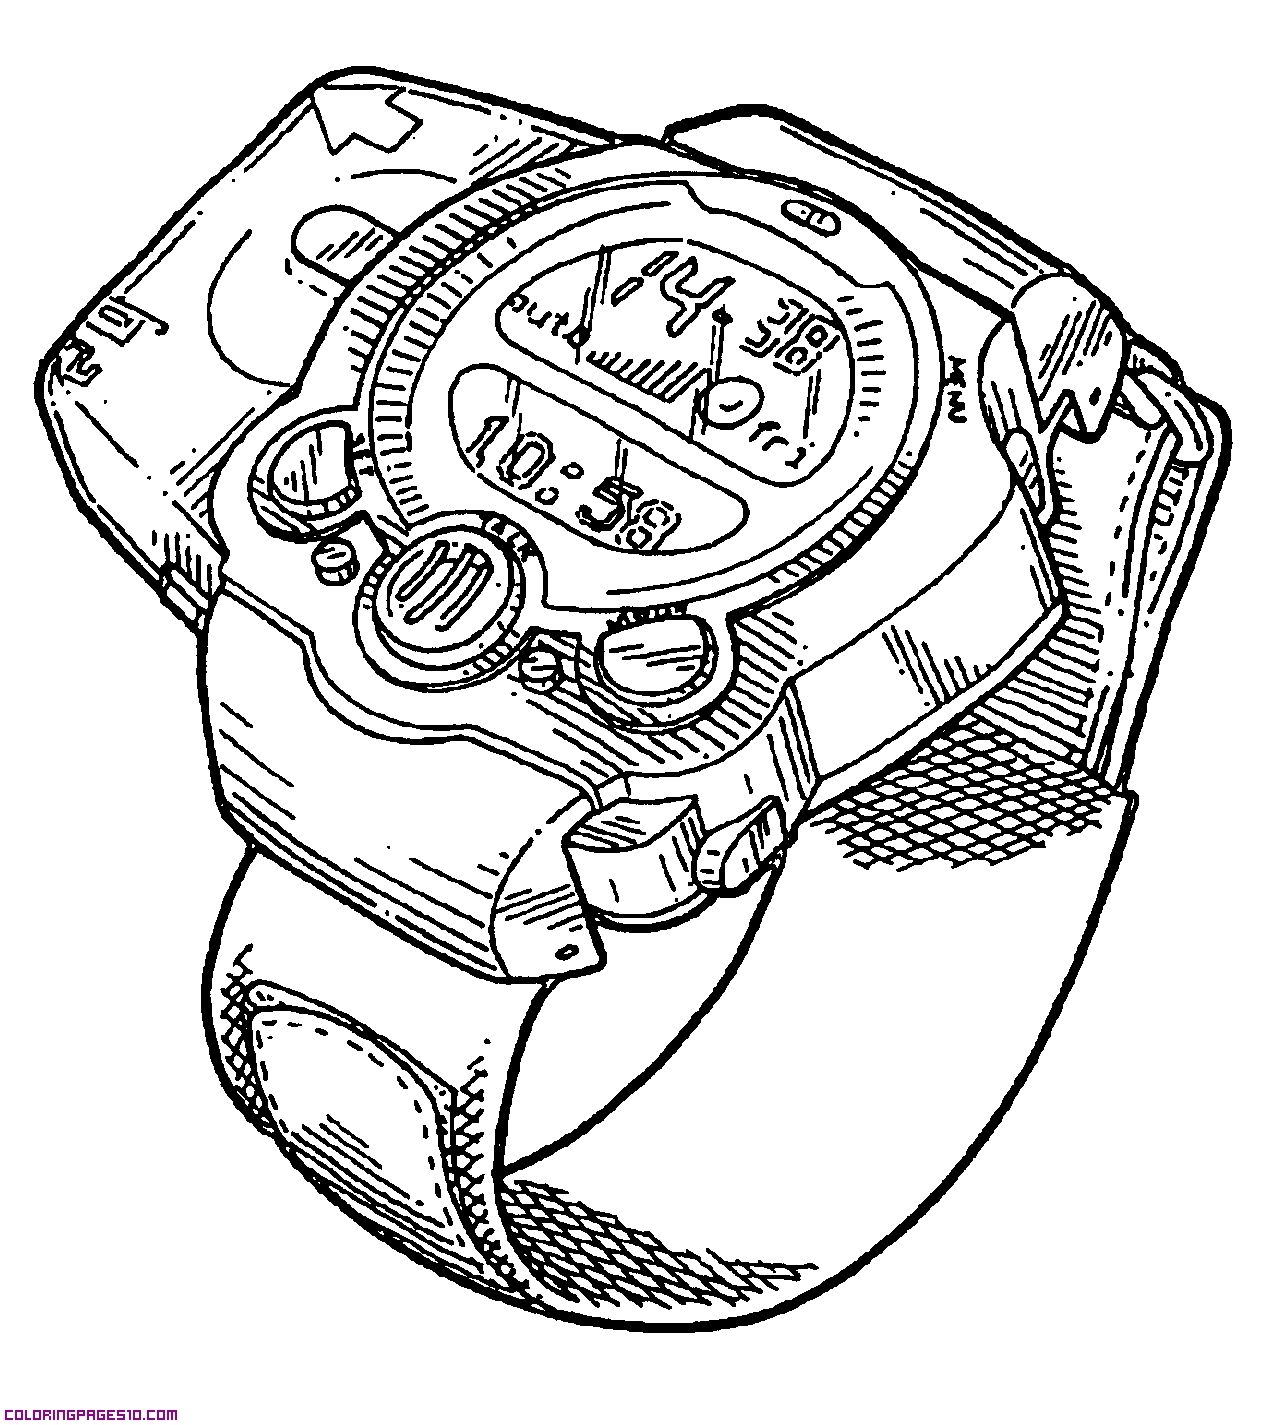 Watch - COLORING PAGES